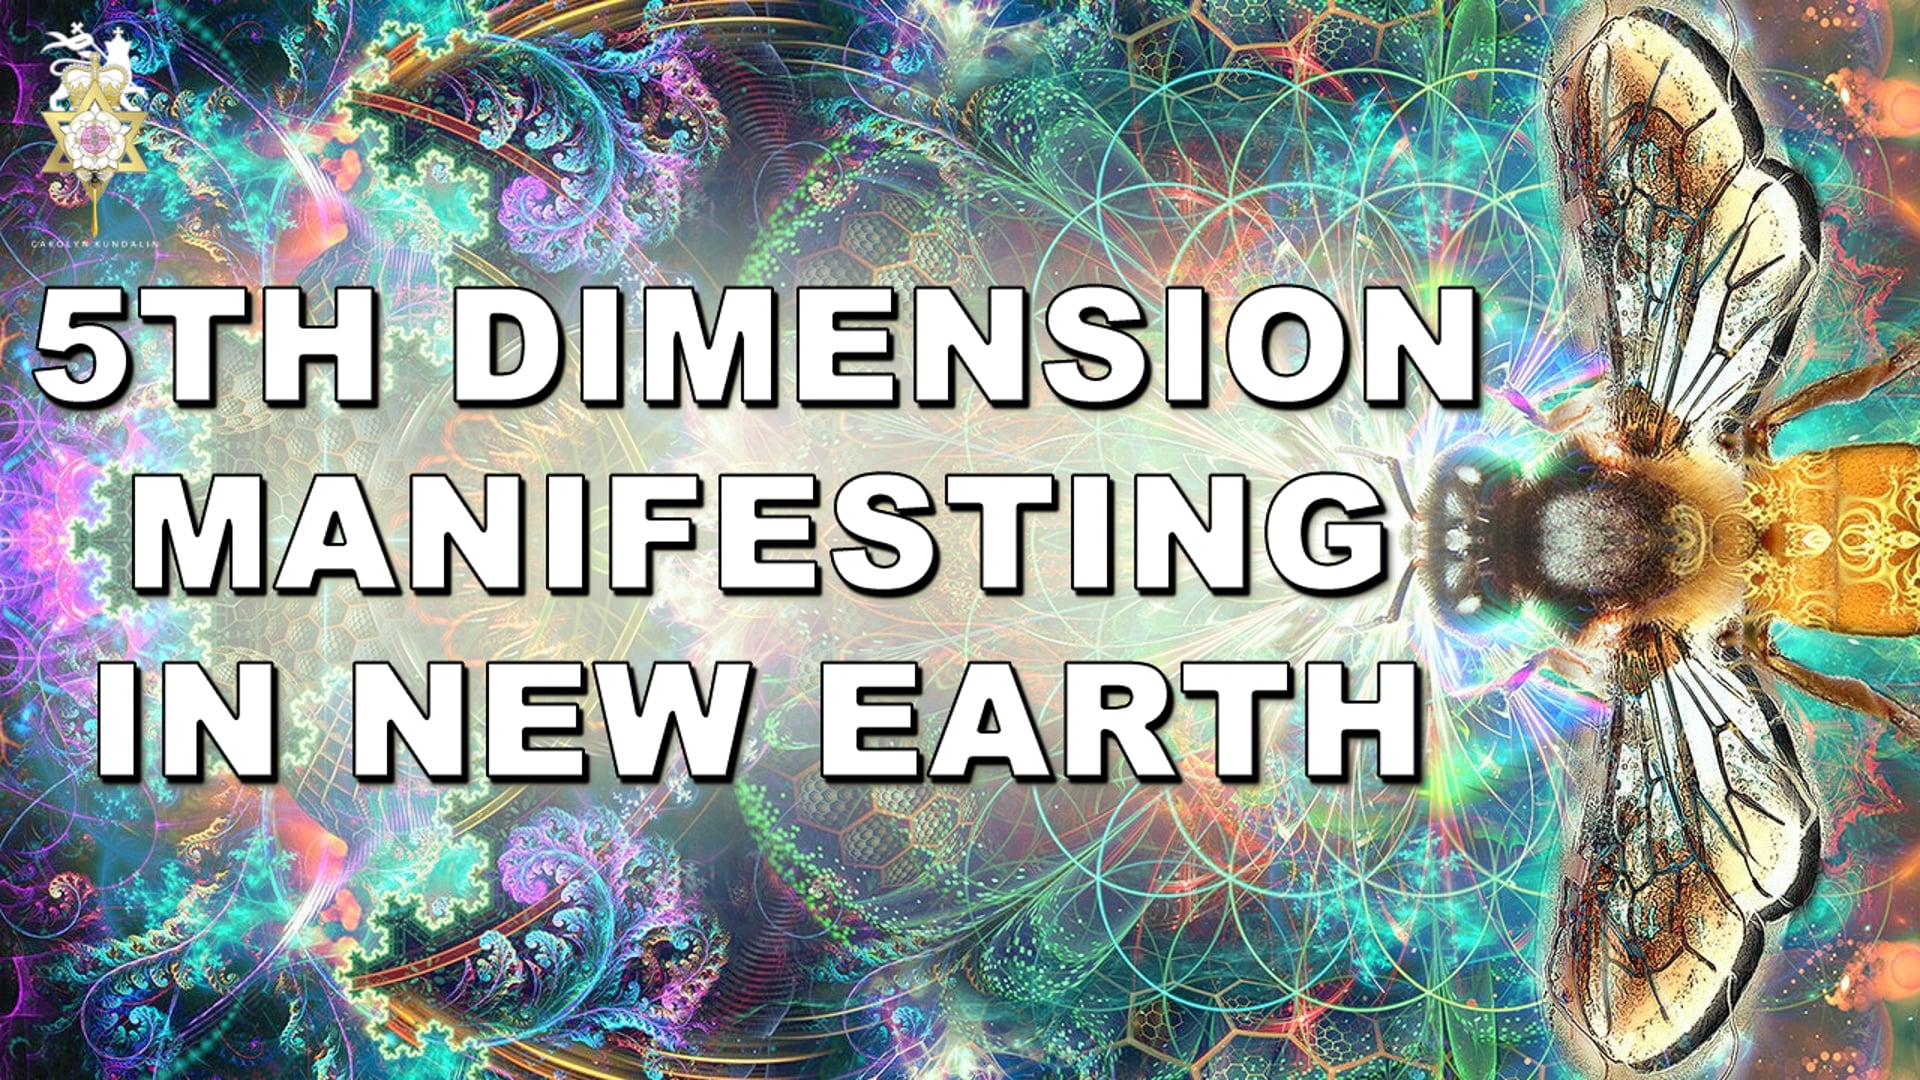 Golden Key to MANIFESTING in the 5th DIMENSION - Manifesting Your New Earth Reality